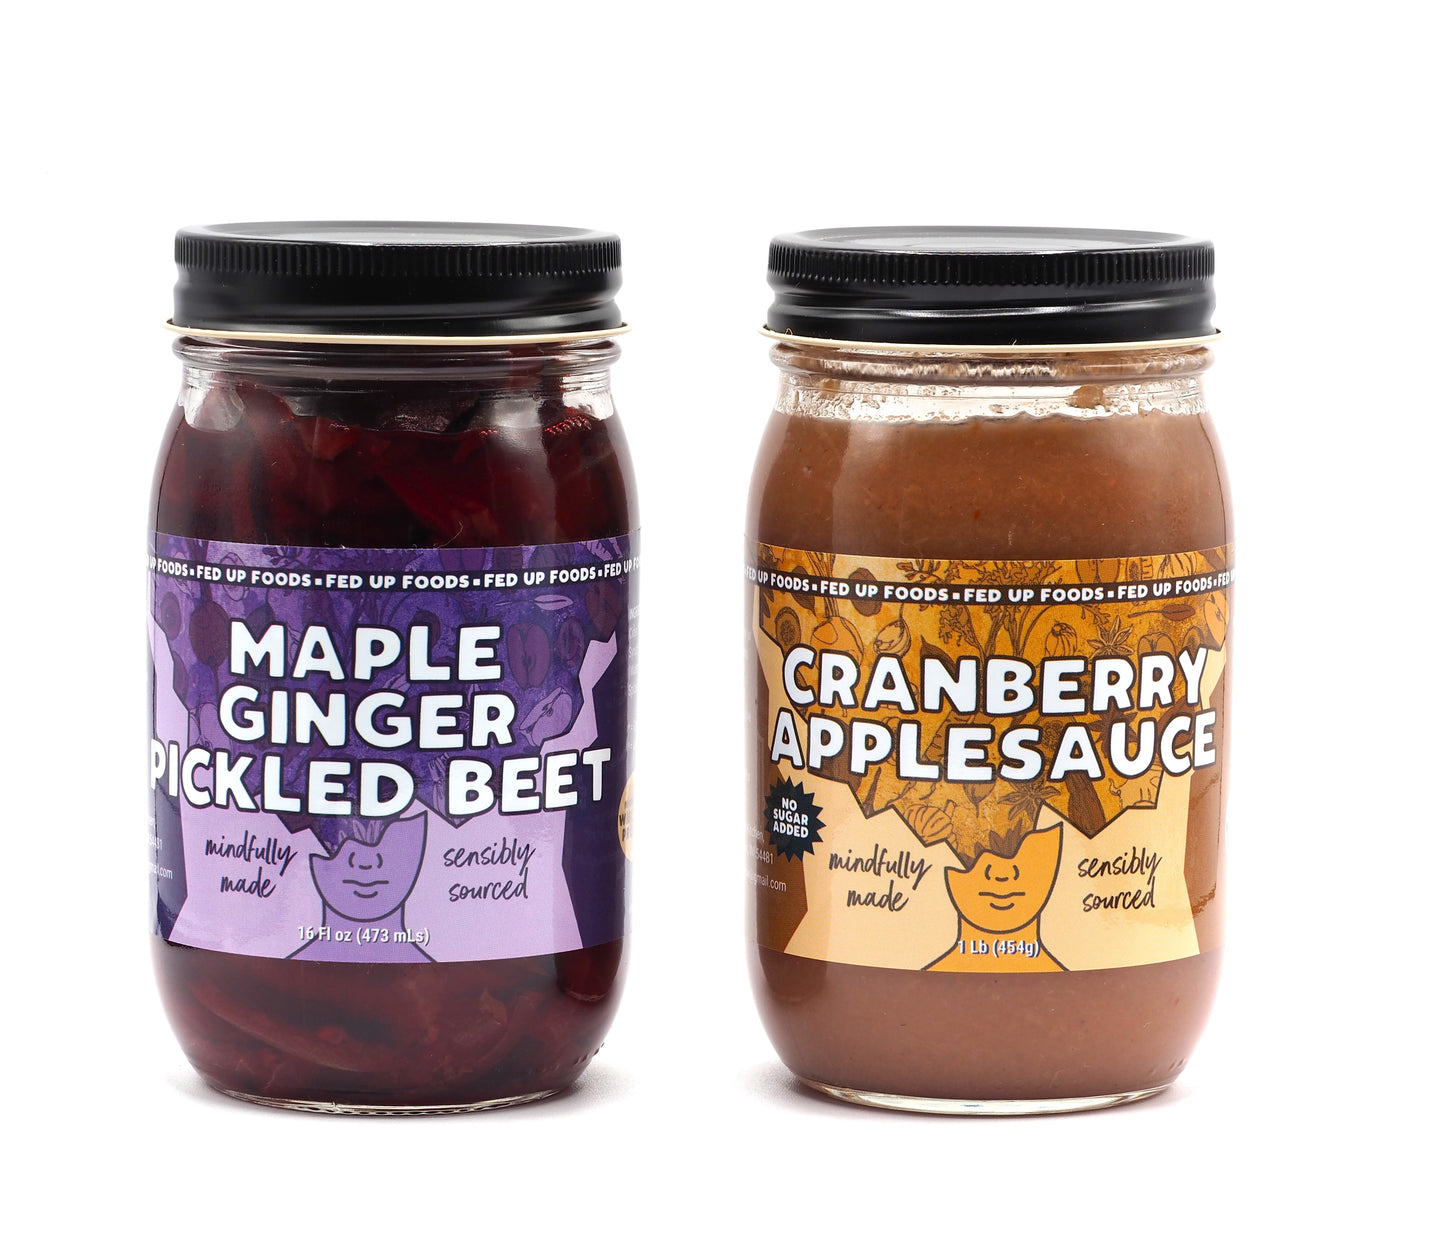 Fed Up Foods Maple Ginger Pickled Beet and Cranberry Applesauce in a 2 pack variety pack